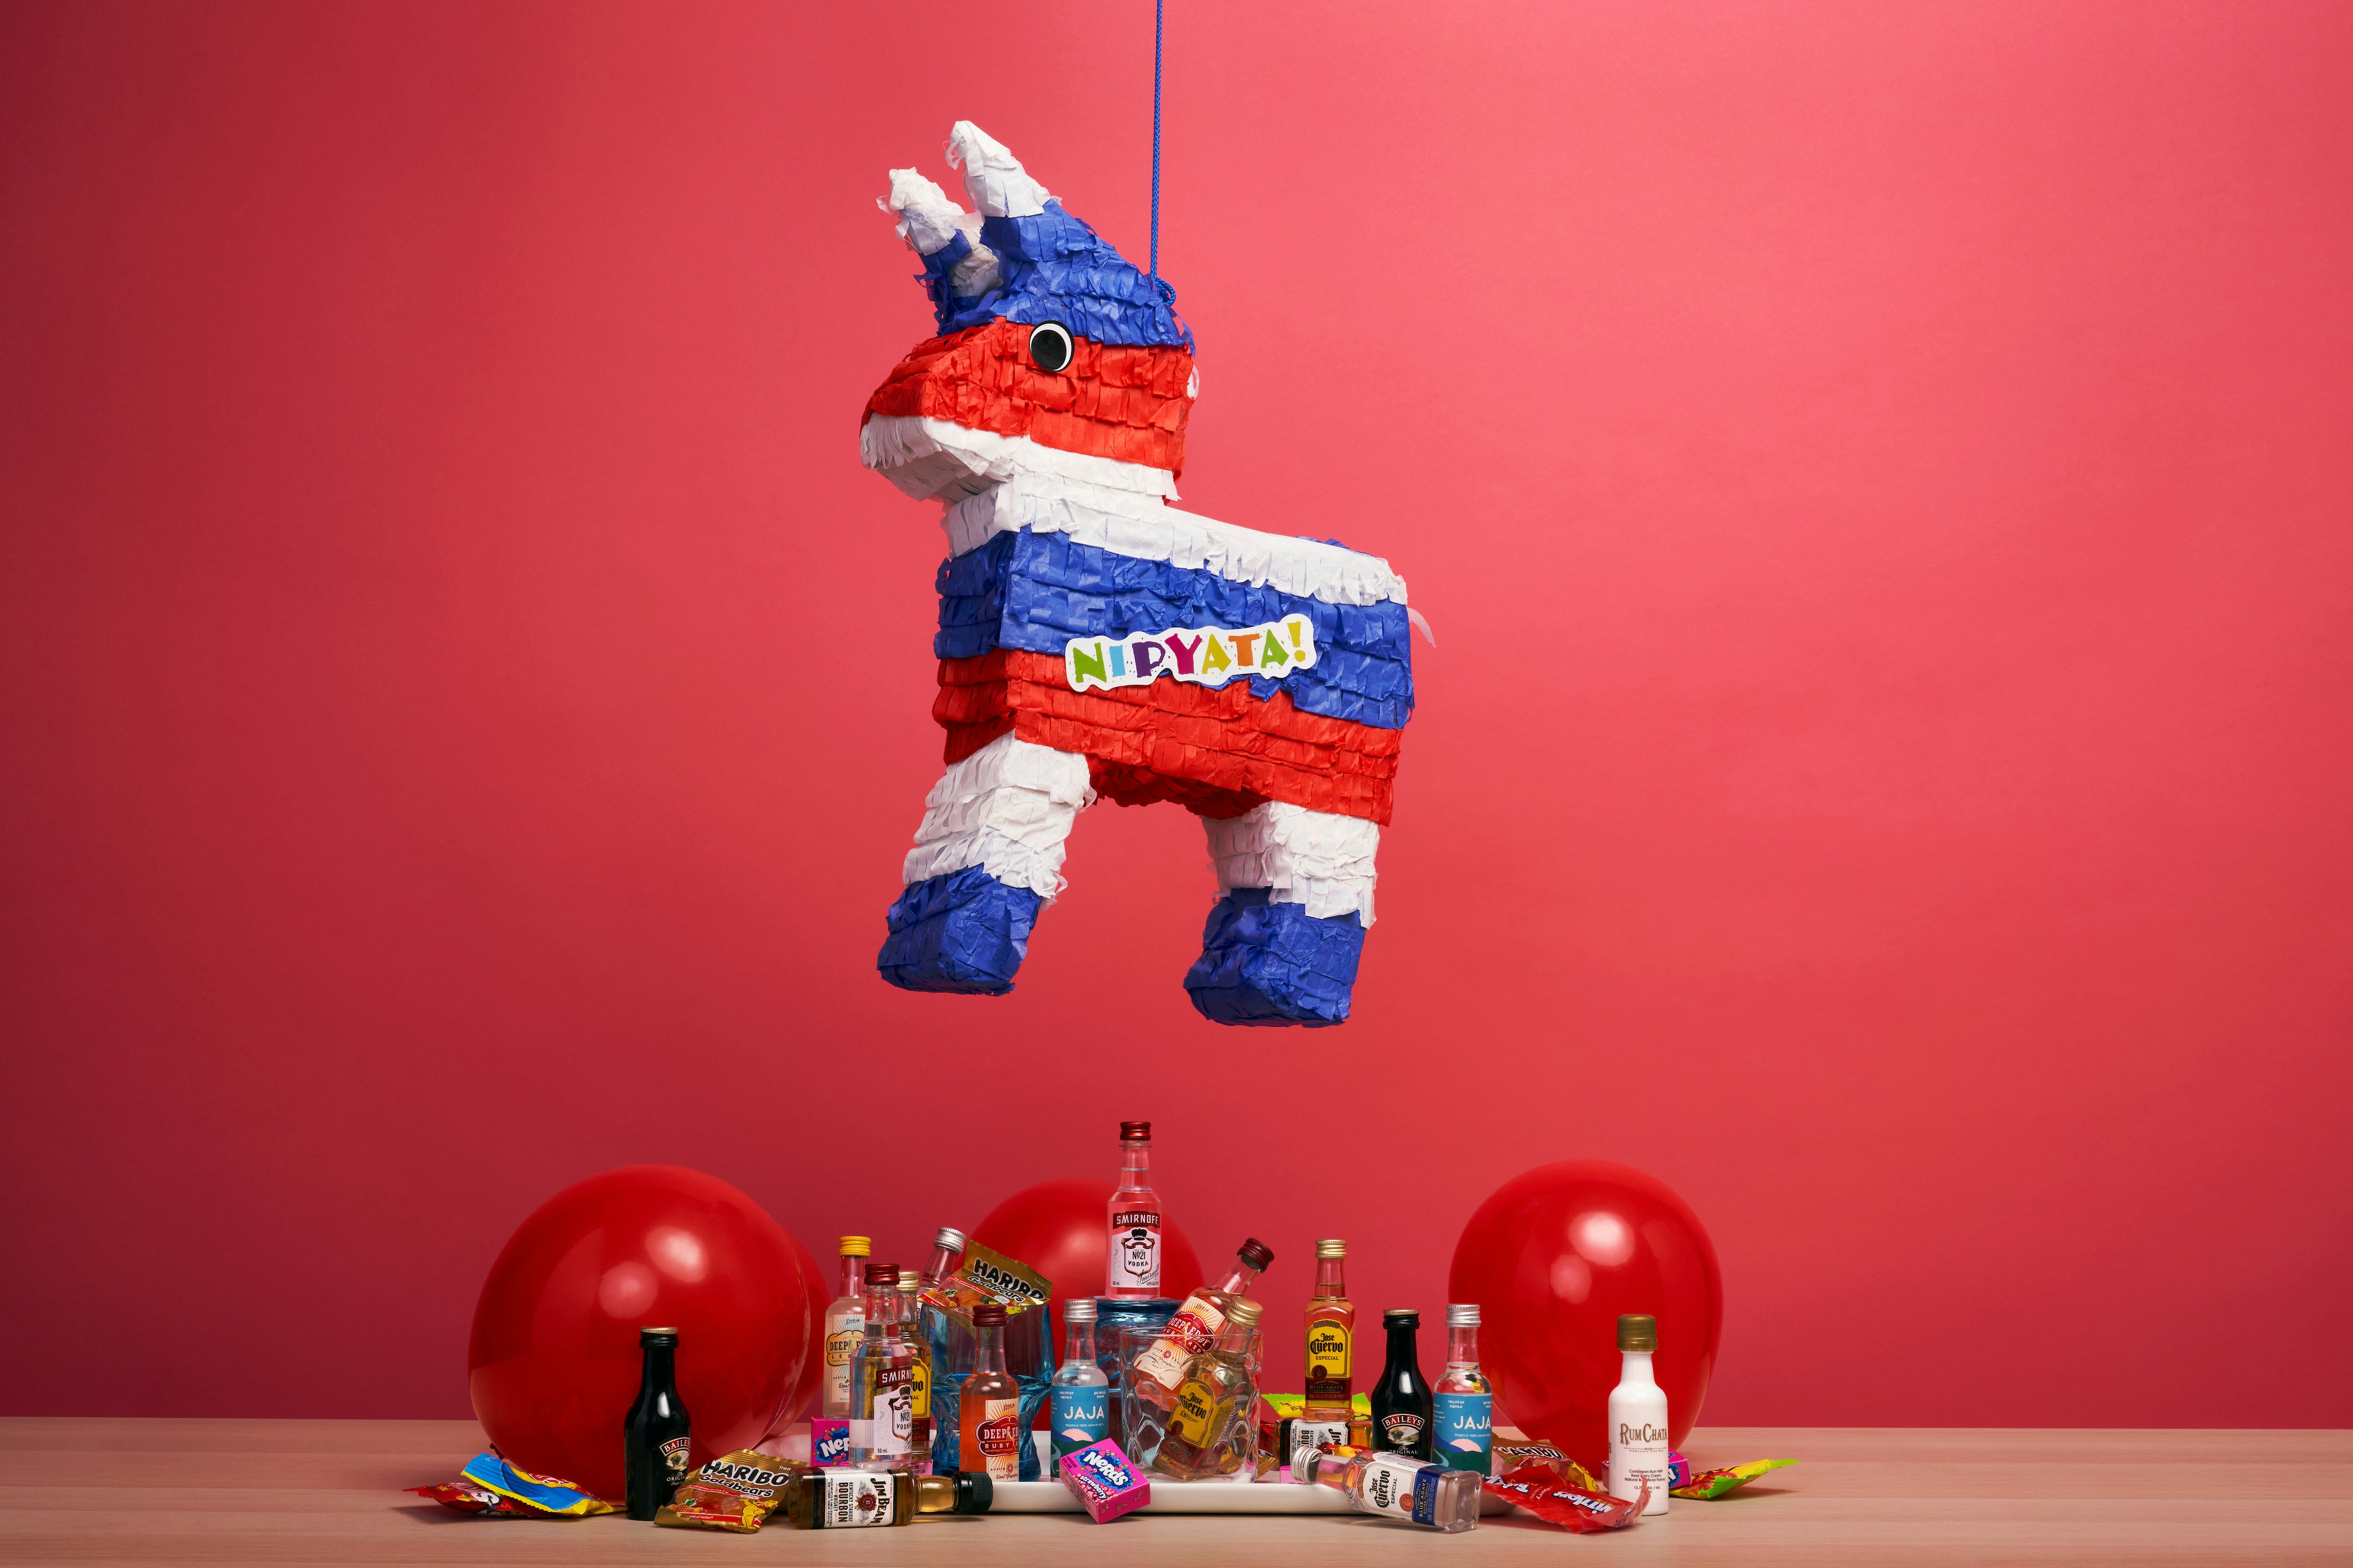 The Freedom Donkey NIPYATA! Booze-filled Piñata will make you feel ready to light off fireworks, drink a 12 pack of Pabst and make a few bad decisions on Independence Day. Happy 4th of July you boozy beauties! Viva NIPYATA!